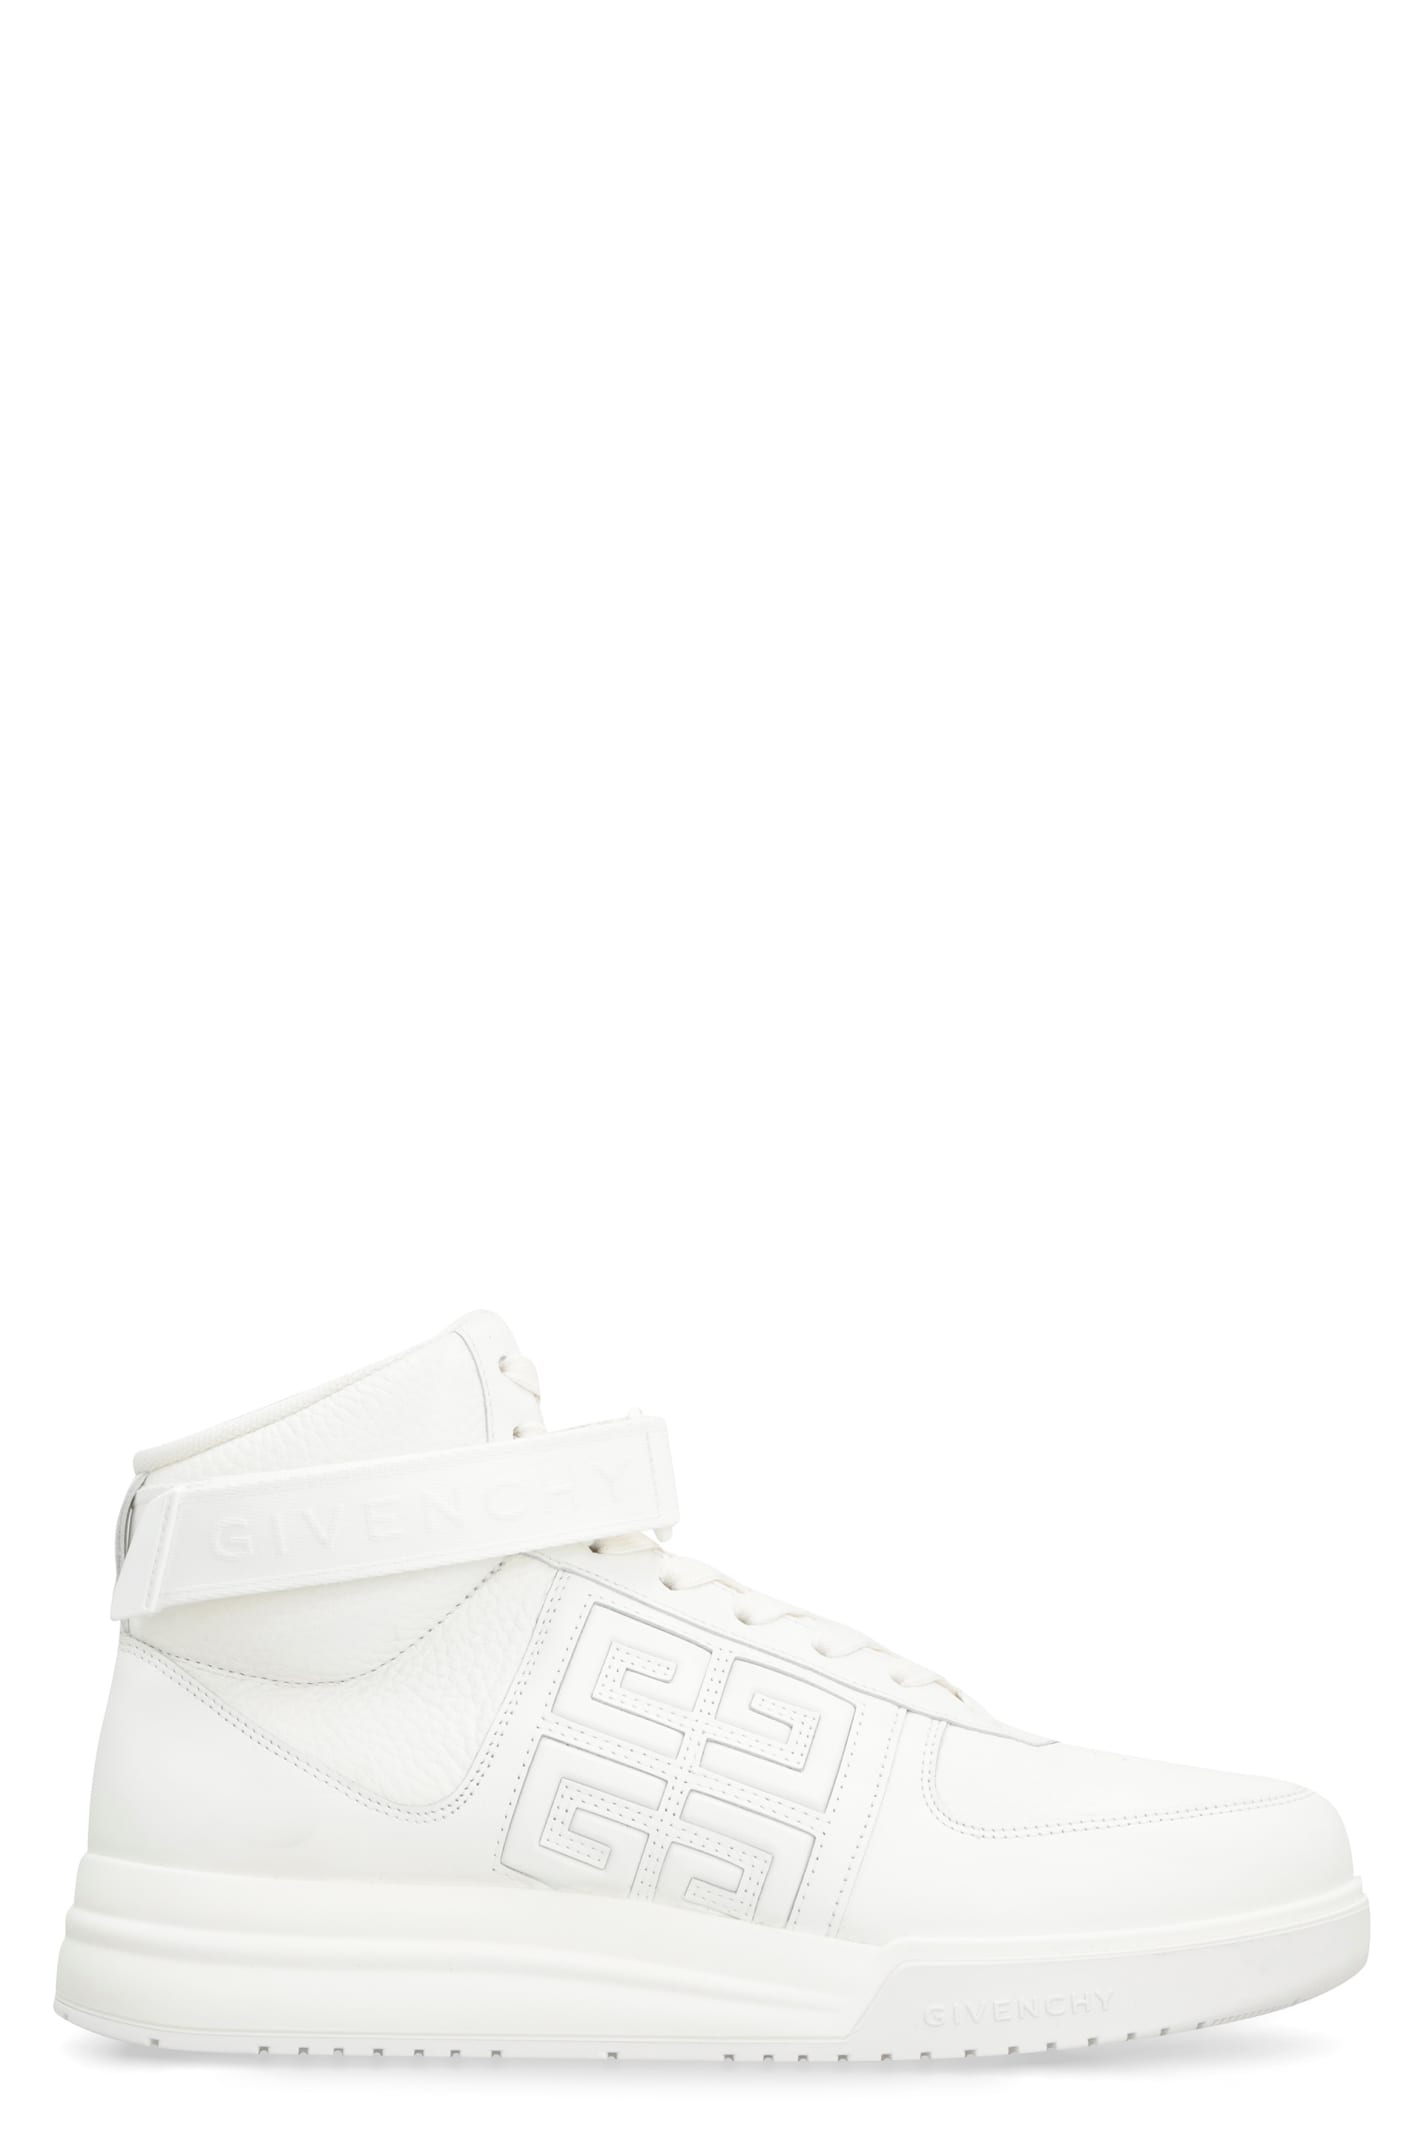 GIVENCHY G4 LEATHER HIGH-TOP SNEAKERS